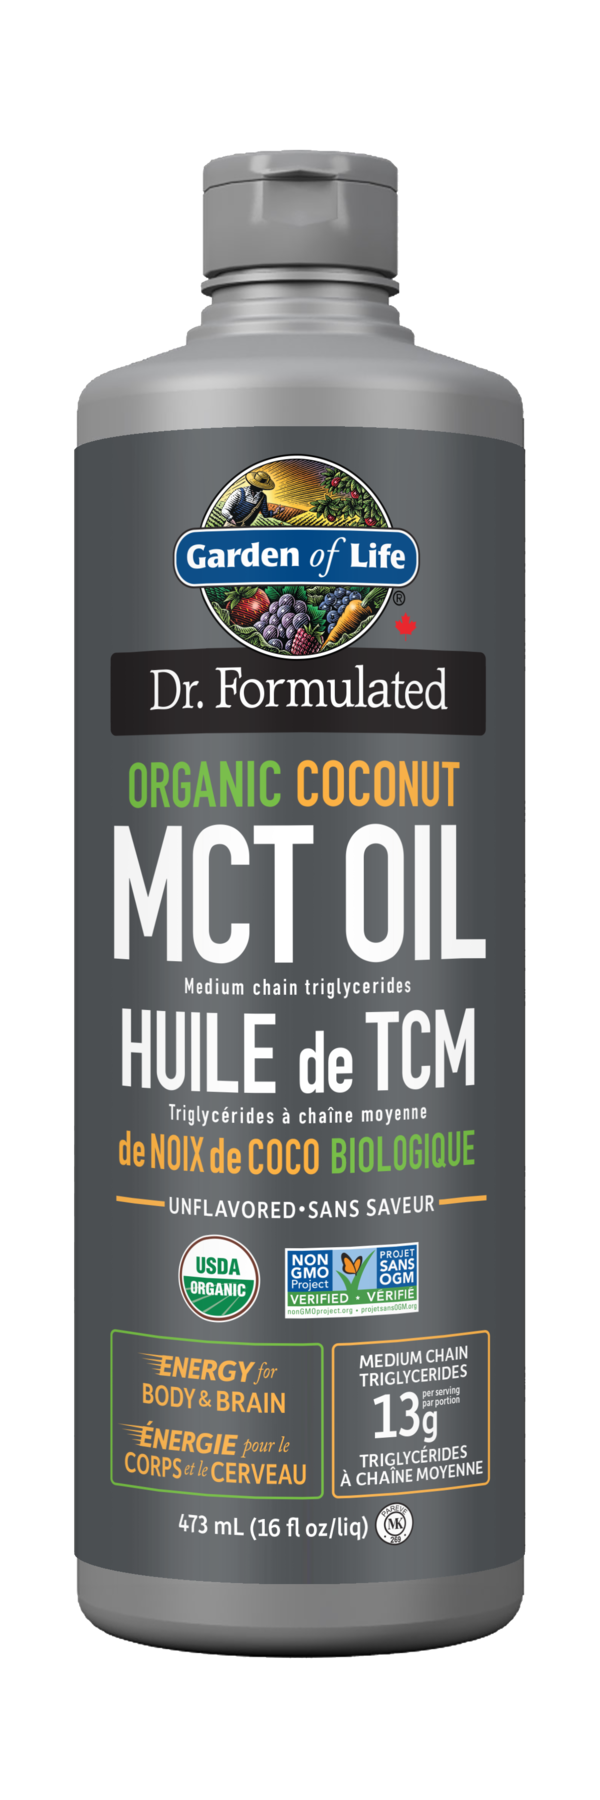 Garden of Life Dr. Formulated Organic MCT Oil